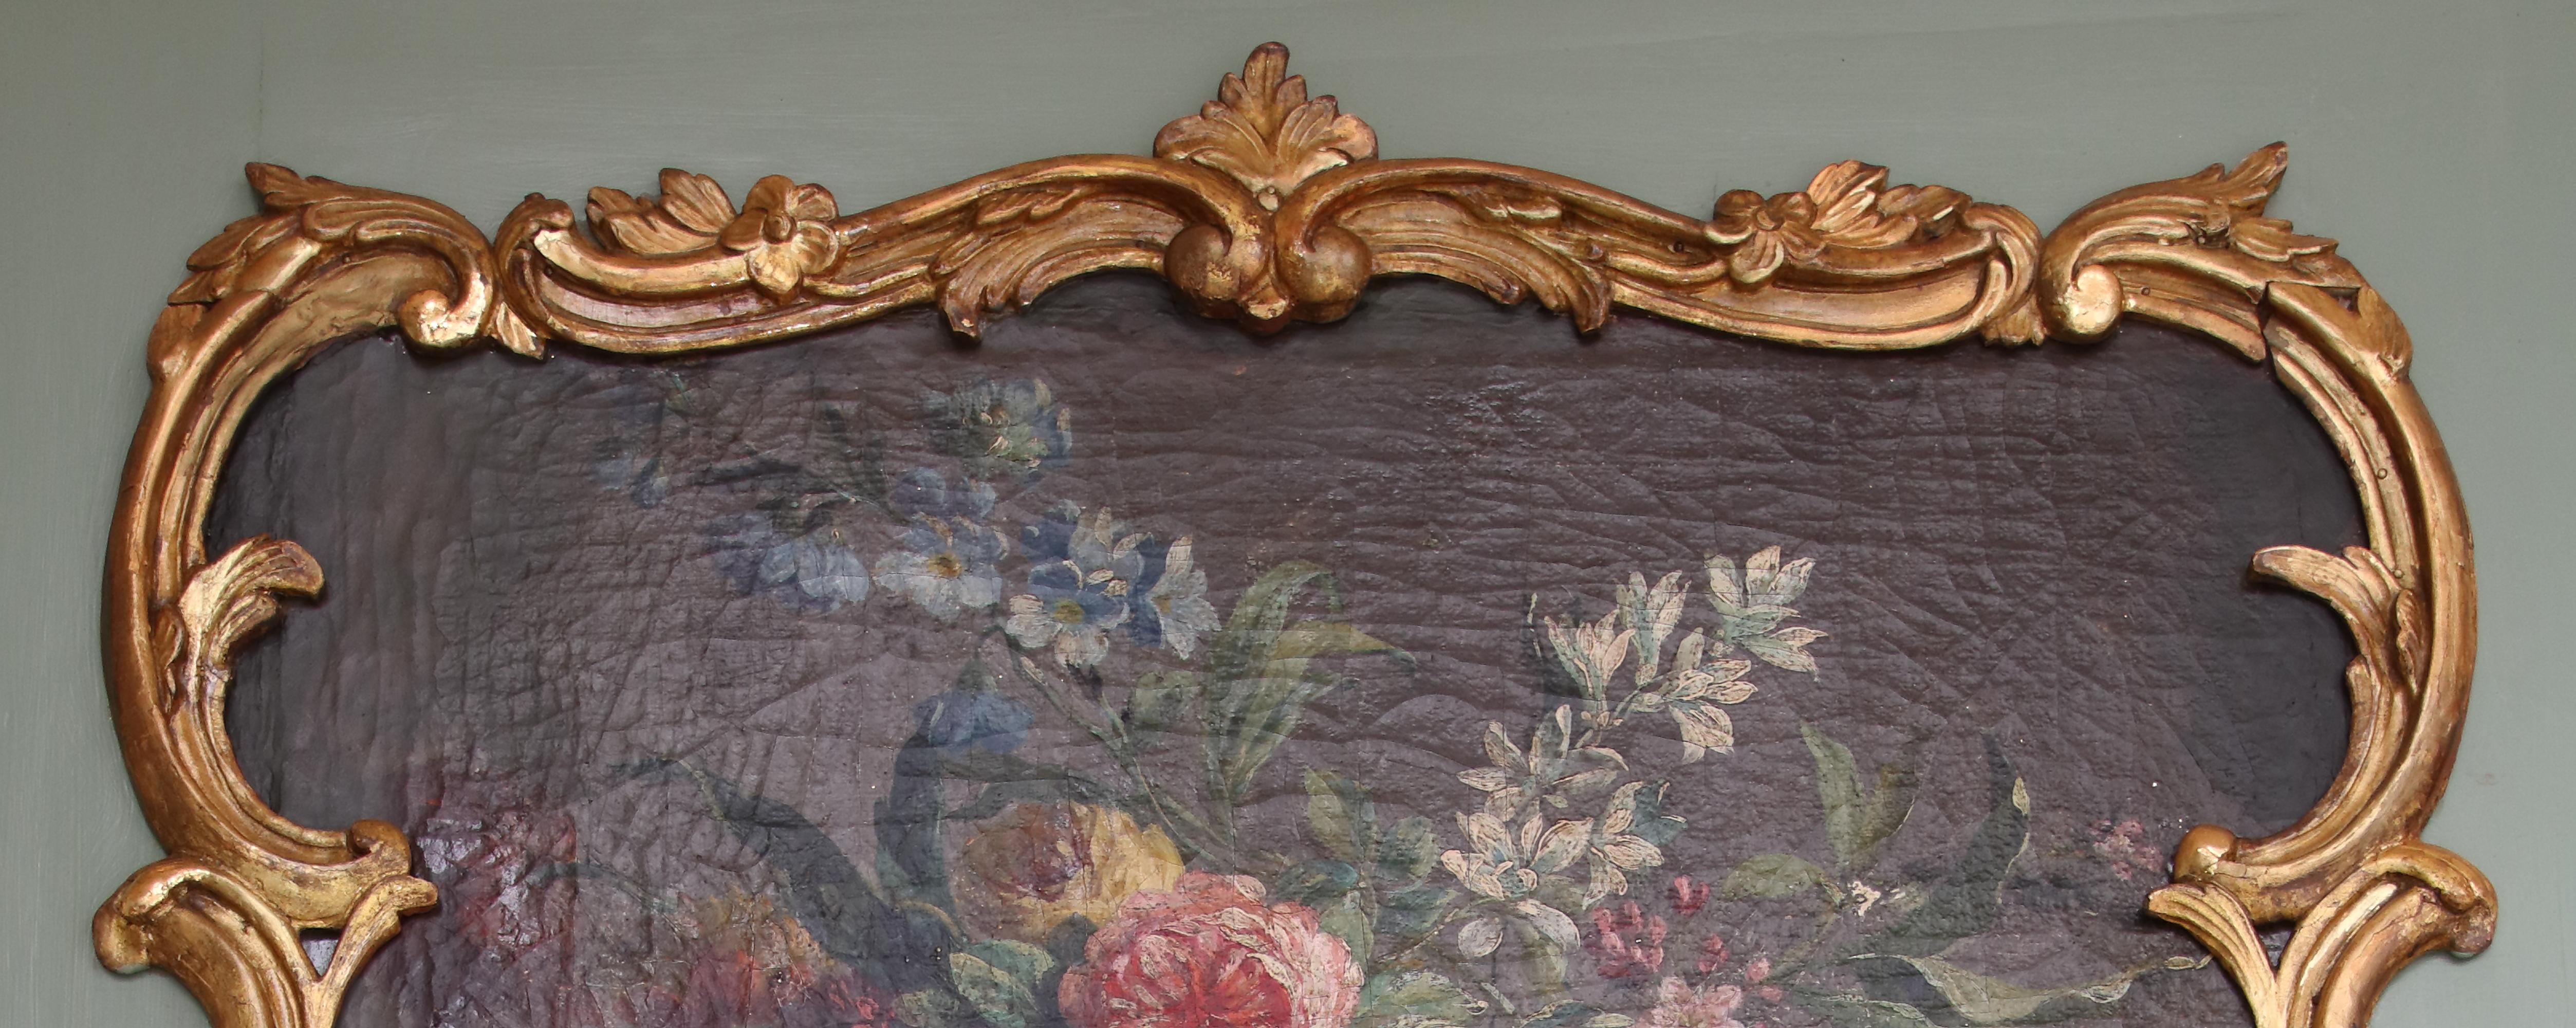 18th Century French Louis XV Period Flower Still Life Trumeau Wall Mirror For Sale 4